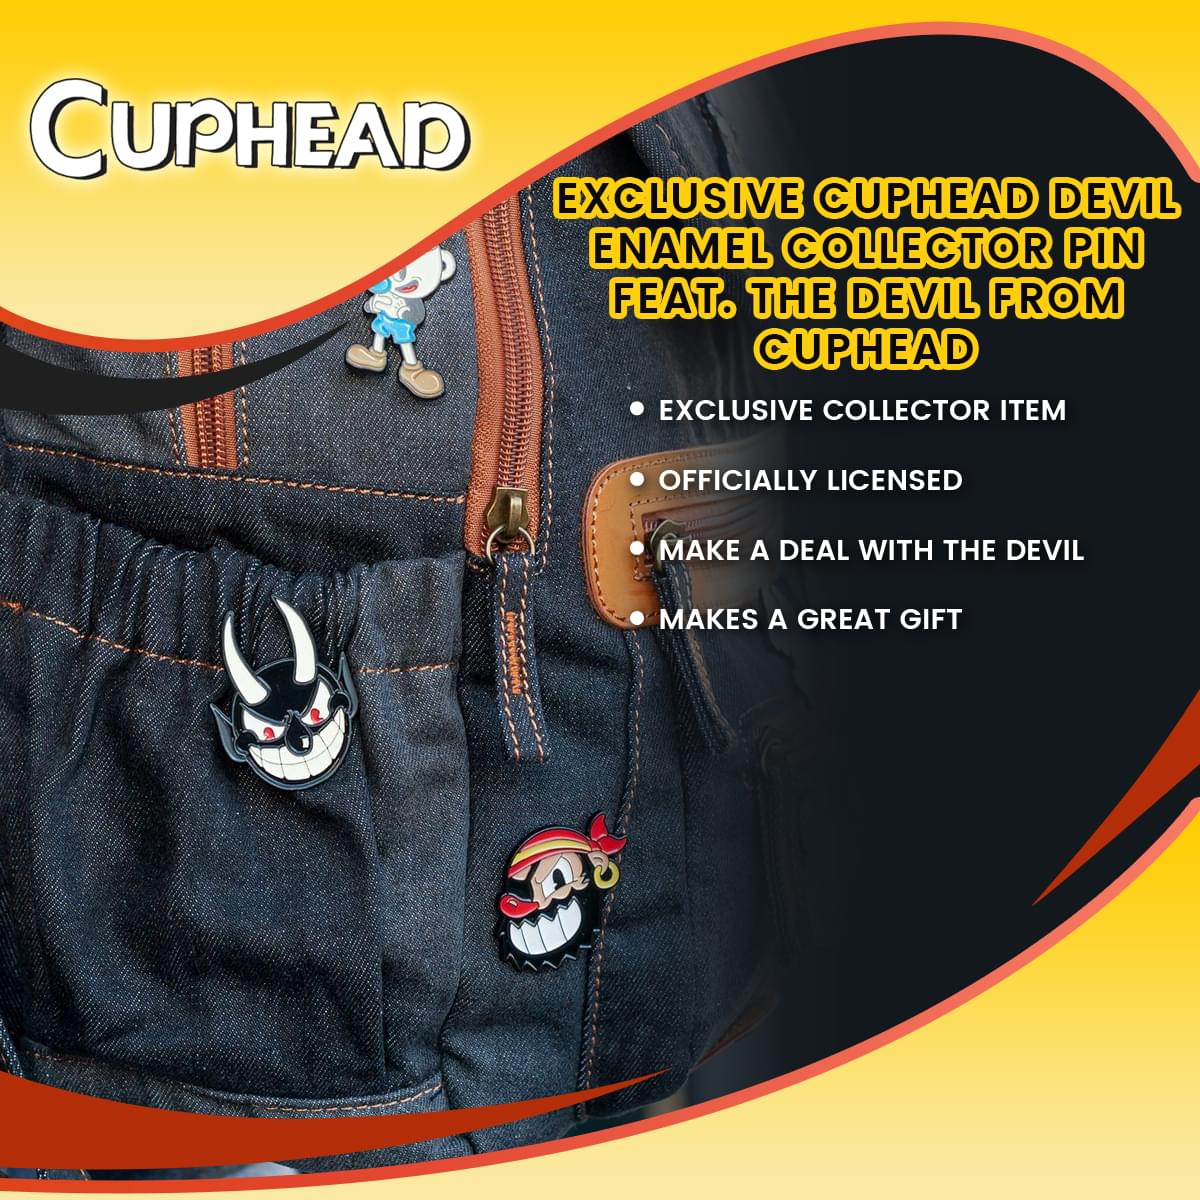 EXCLUSIVE Cuphead Devil Enamel Collector Pin | Feat. The Devil From Cuphead